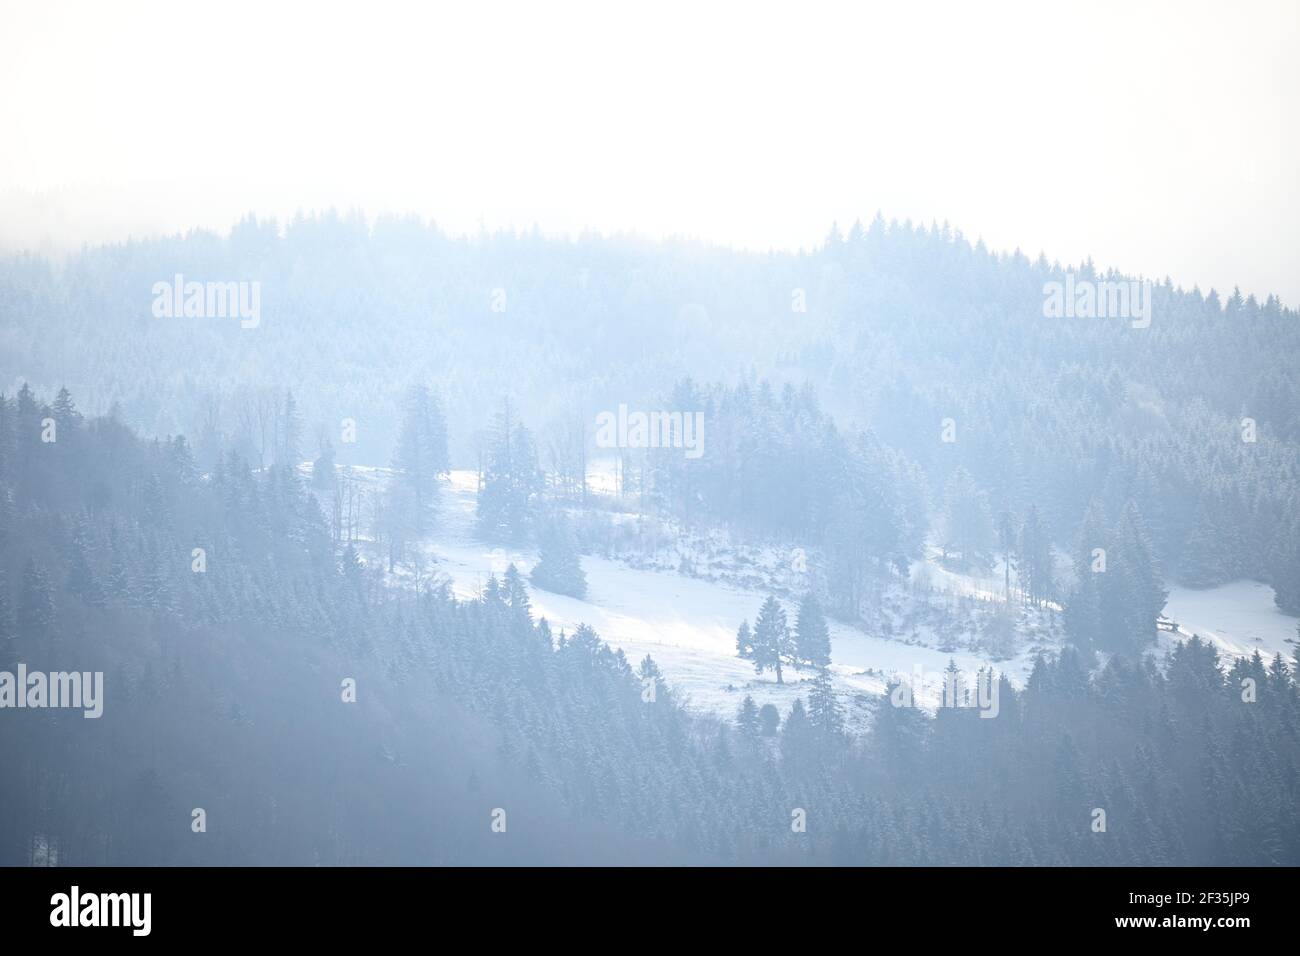 Foggy, snowy landscapes of mountains Stock Photo